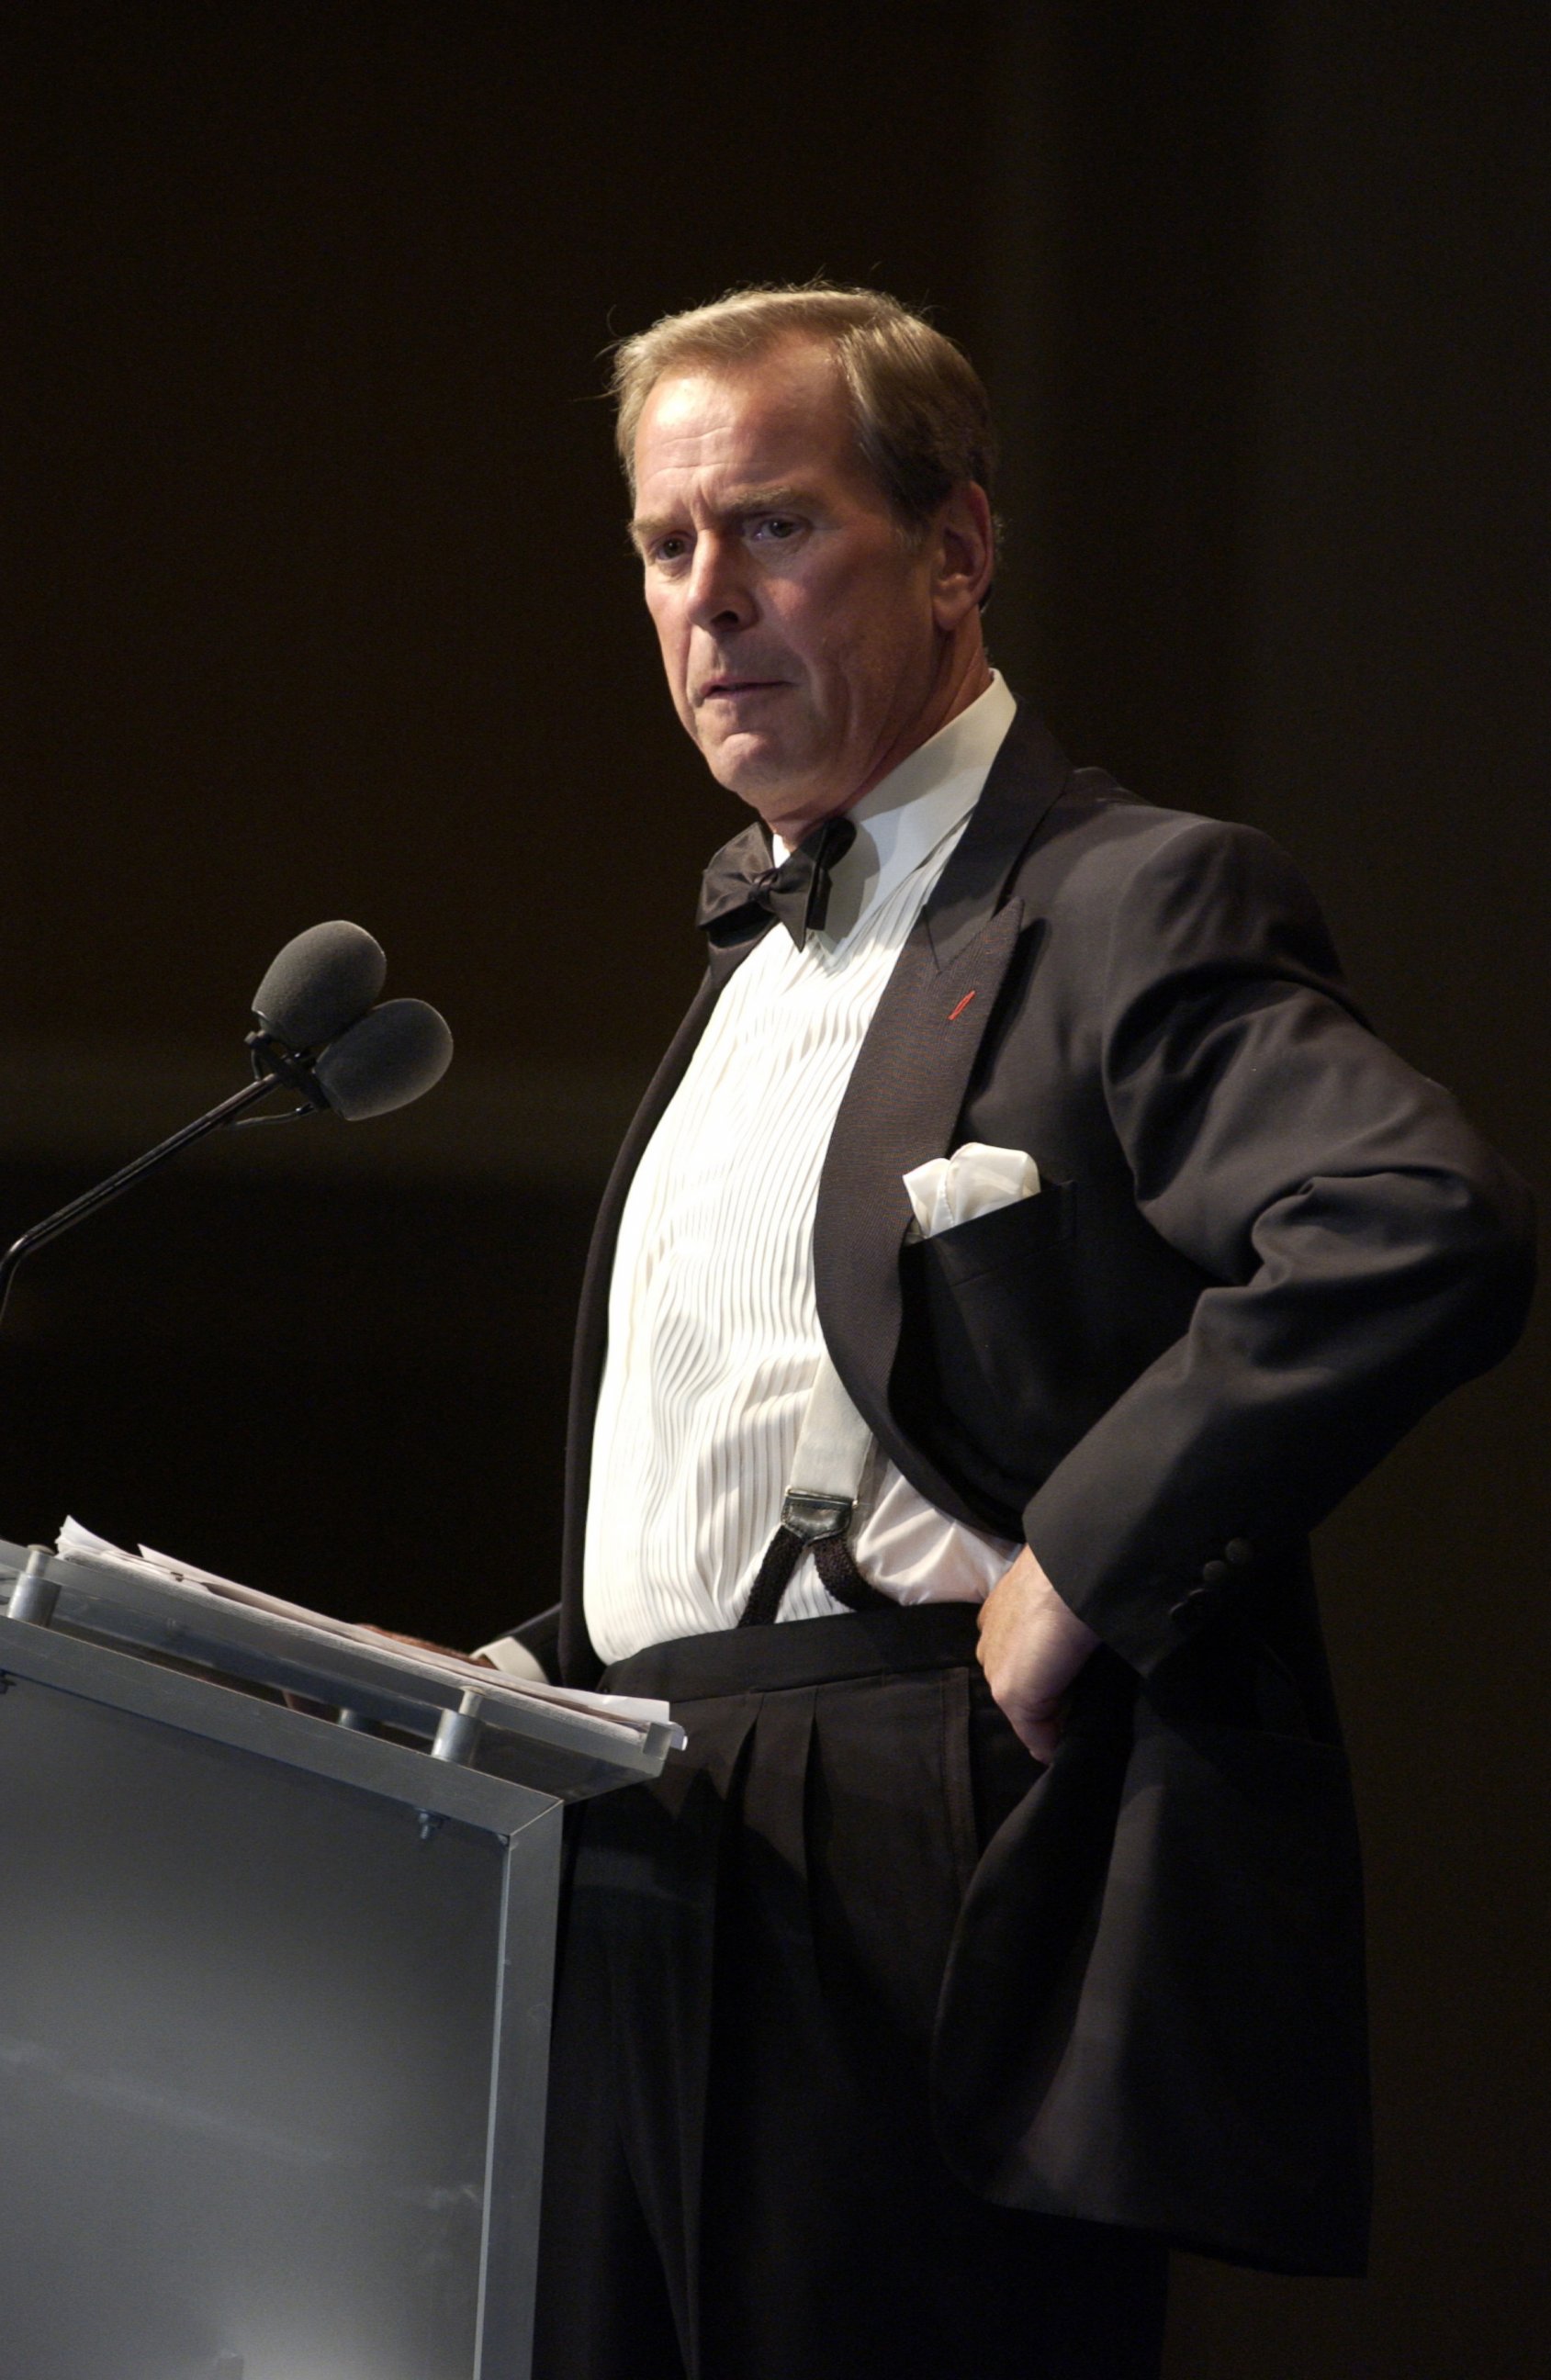 PHOTO: ABC News Anchor Peter Jennings during 25th Annual NATAS News and Documentary Emmys 2004 Honoring Tom Brokaw at Mariott Marquis Hotel NY in New York, NY, United States.